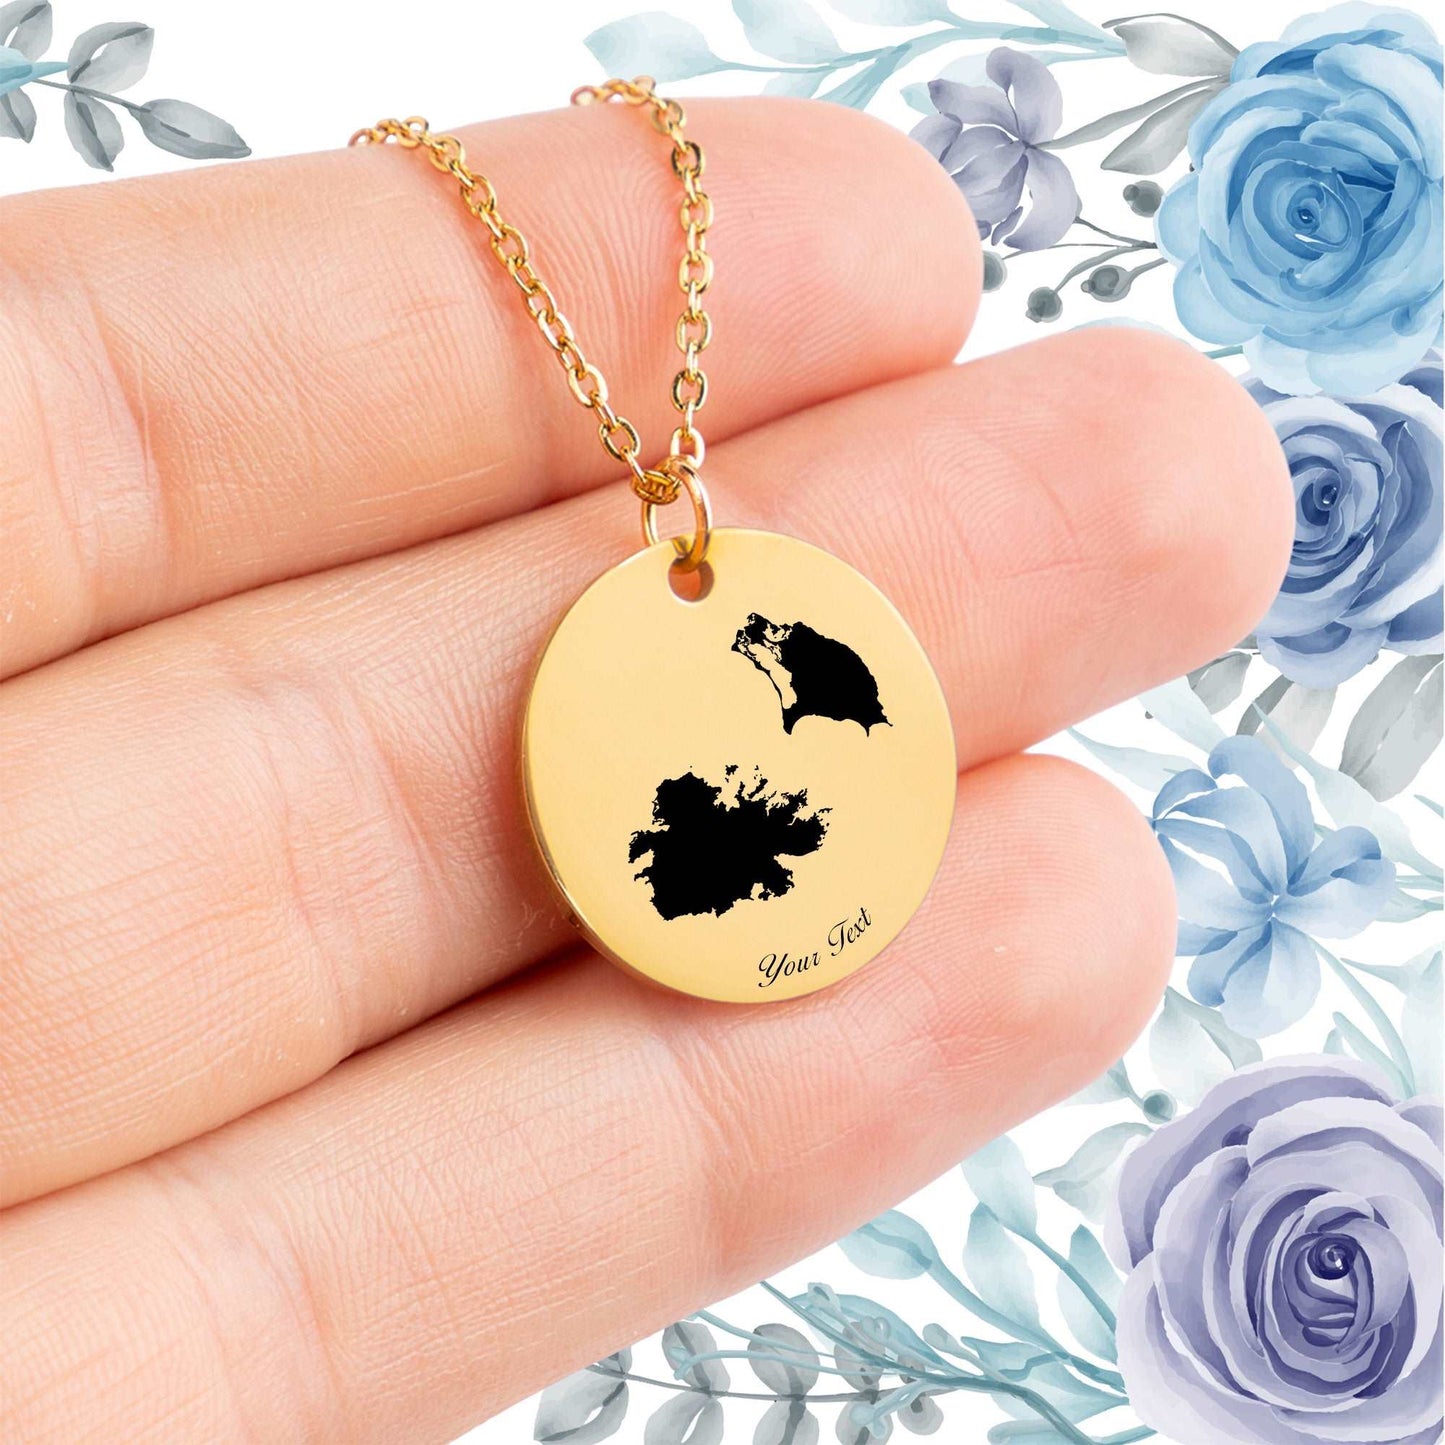 Antigua and Barbuda Country Map Necklace - Personalizable Jewelry